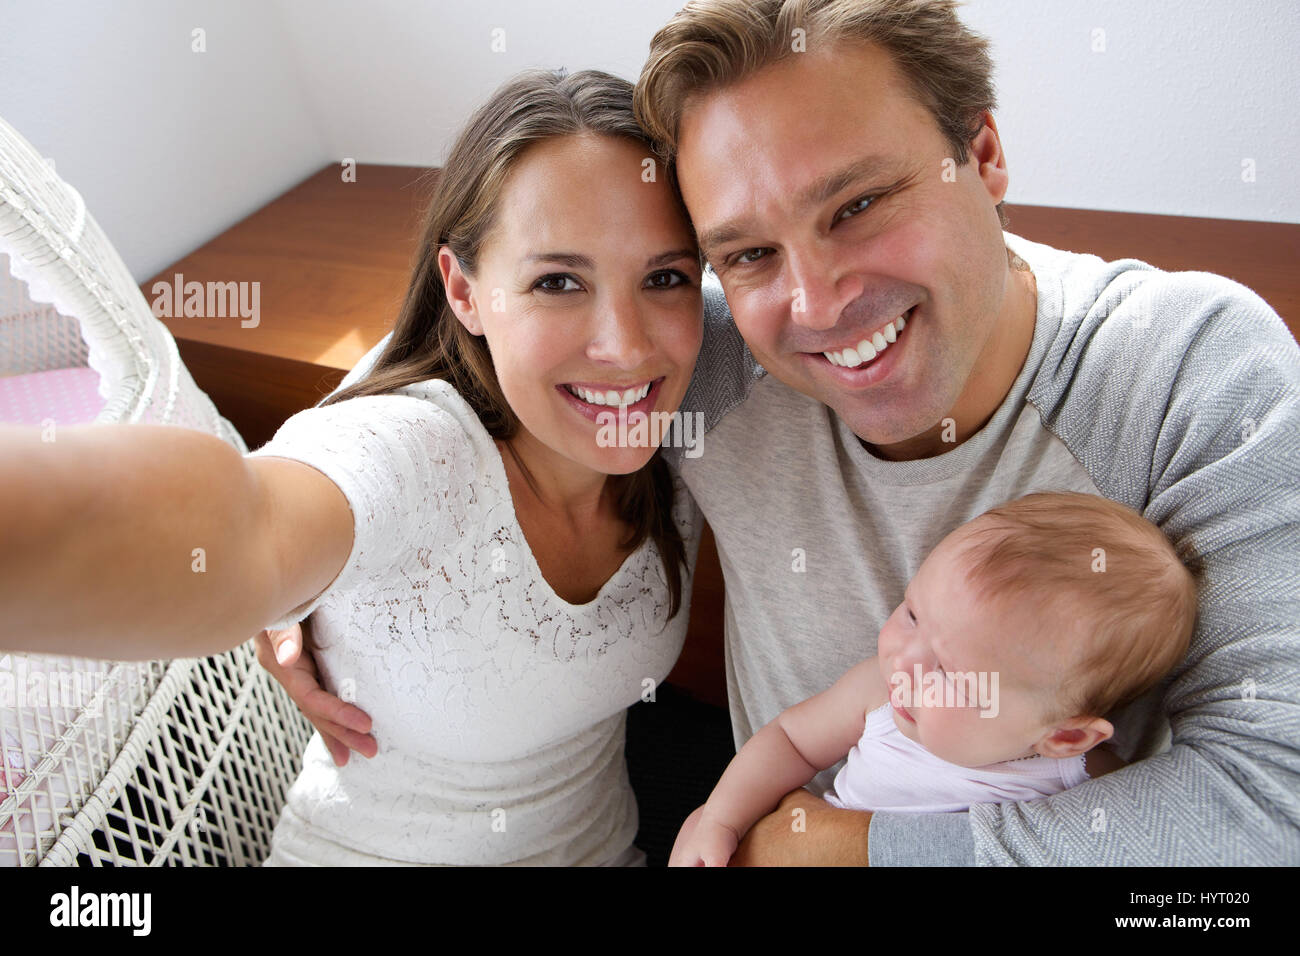 Close up portrait of a happy couple photographing themselves with new baby Banque D'Images